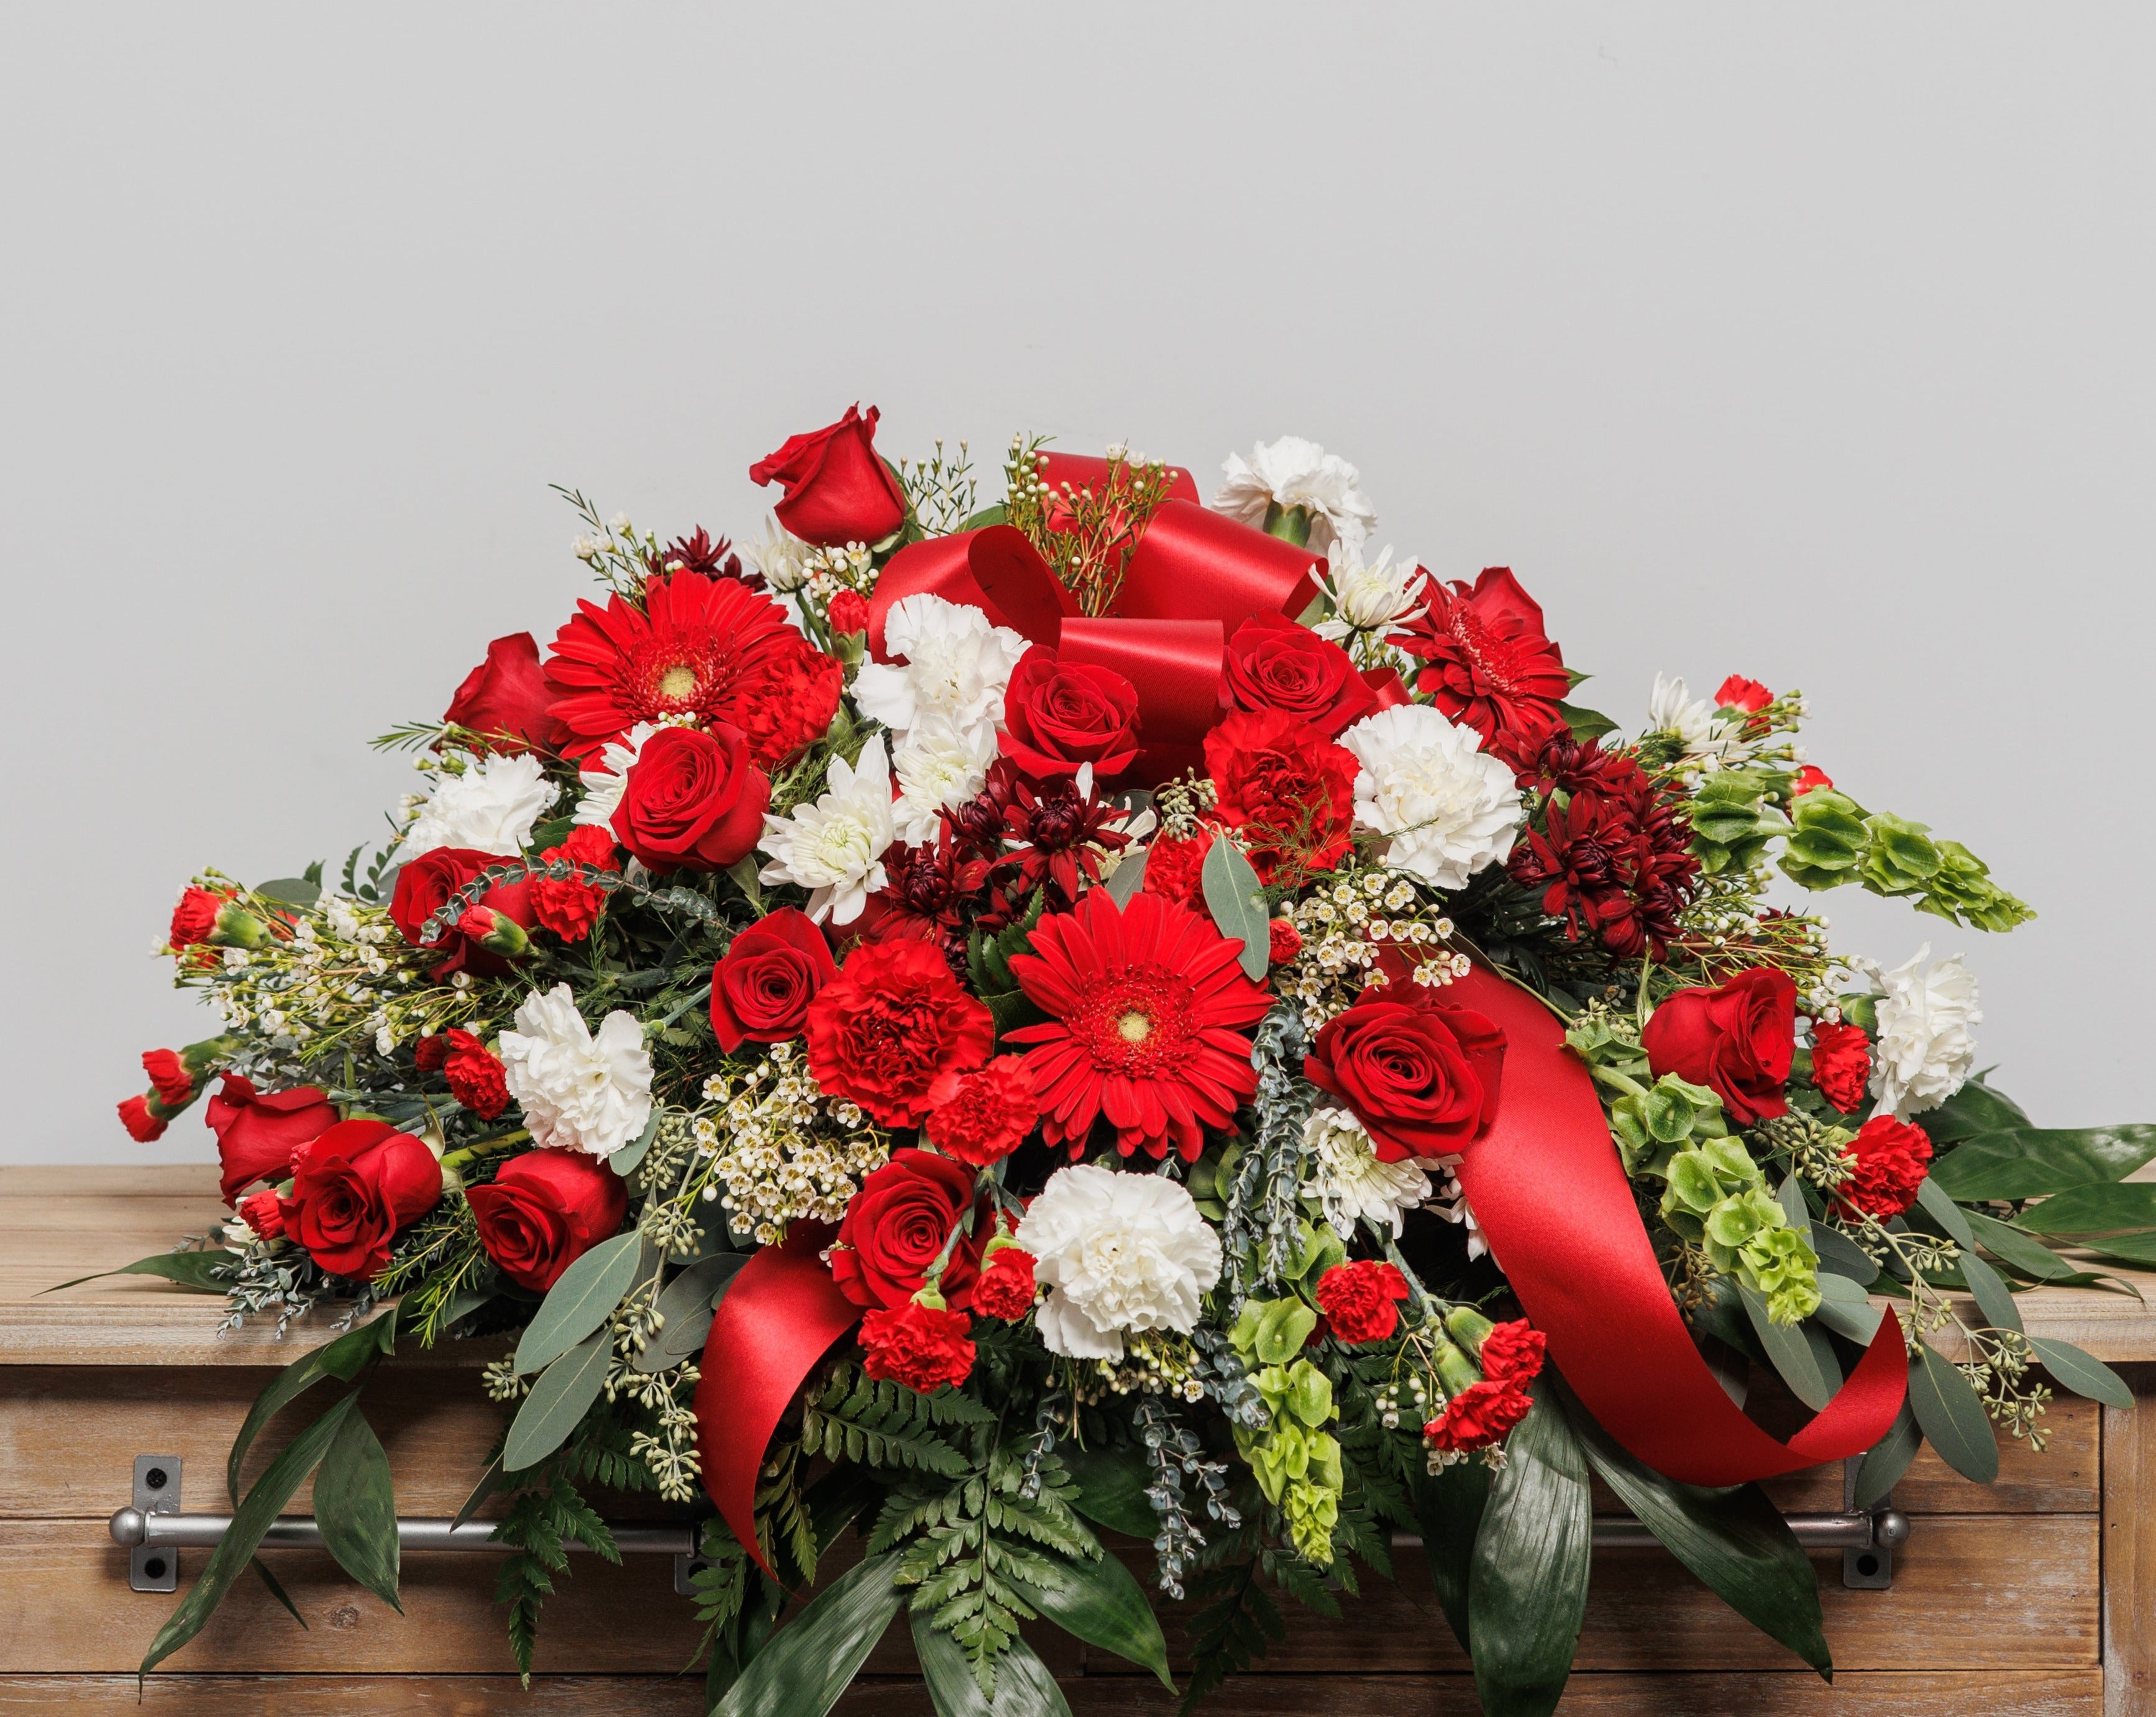 A casket spray with red gerber daisies, red roses and white carnations.